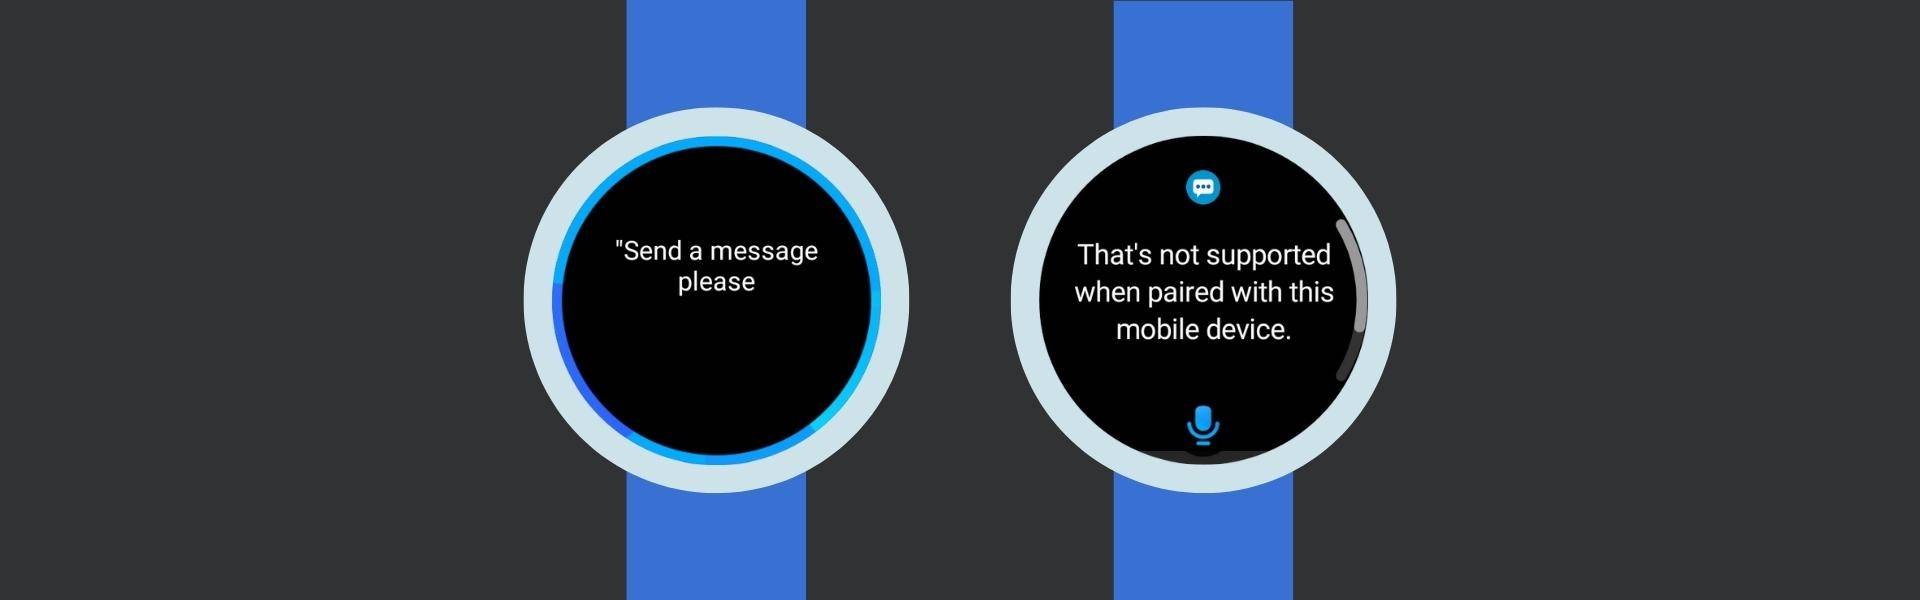 galaxy watch 4 screens while using Bixby to send messages on non-Samsung phones